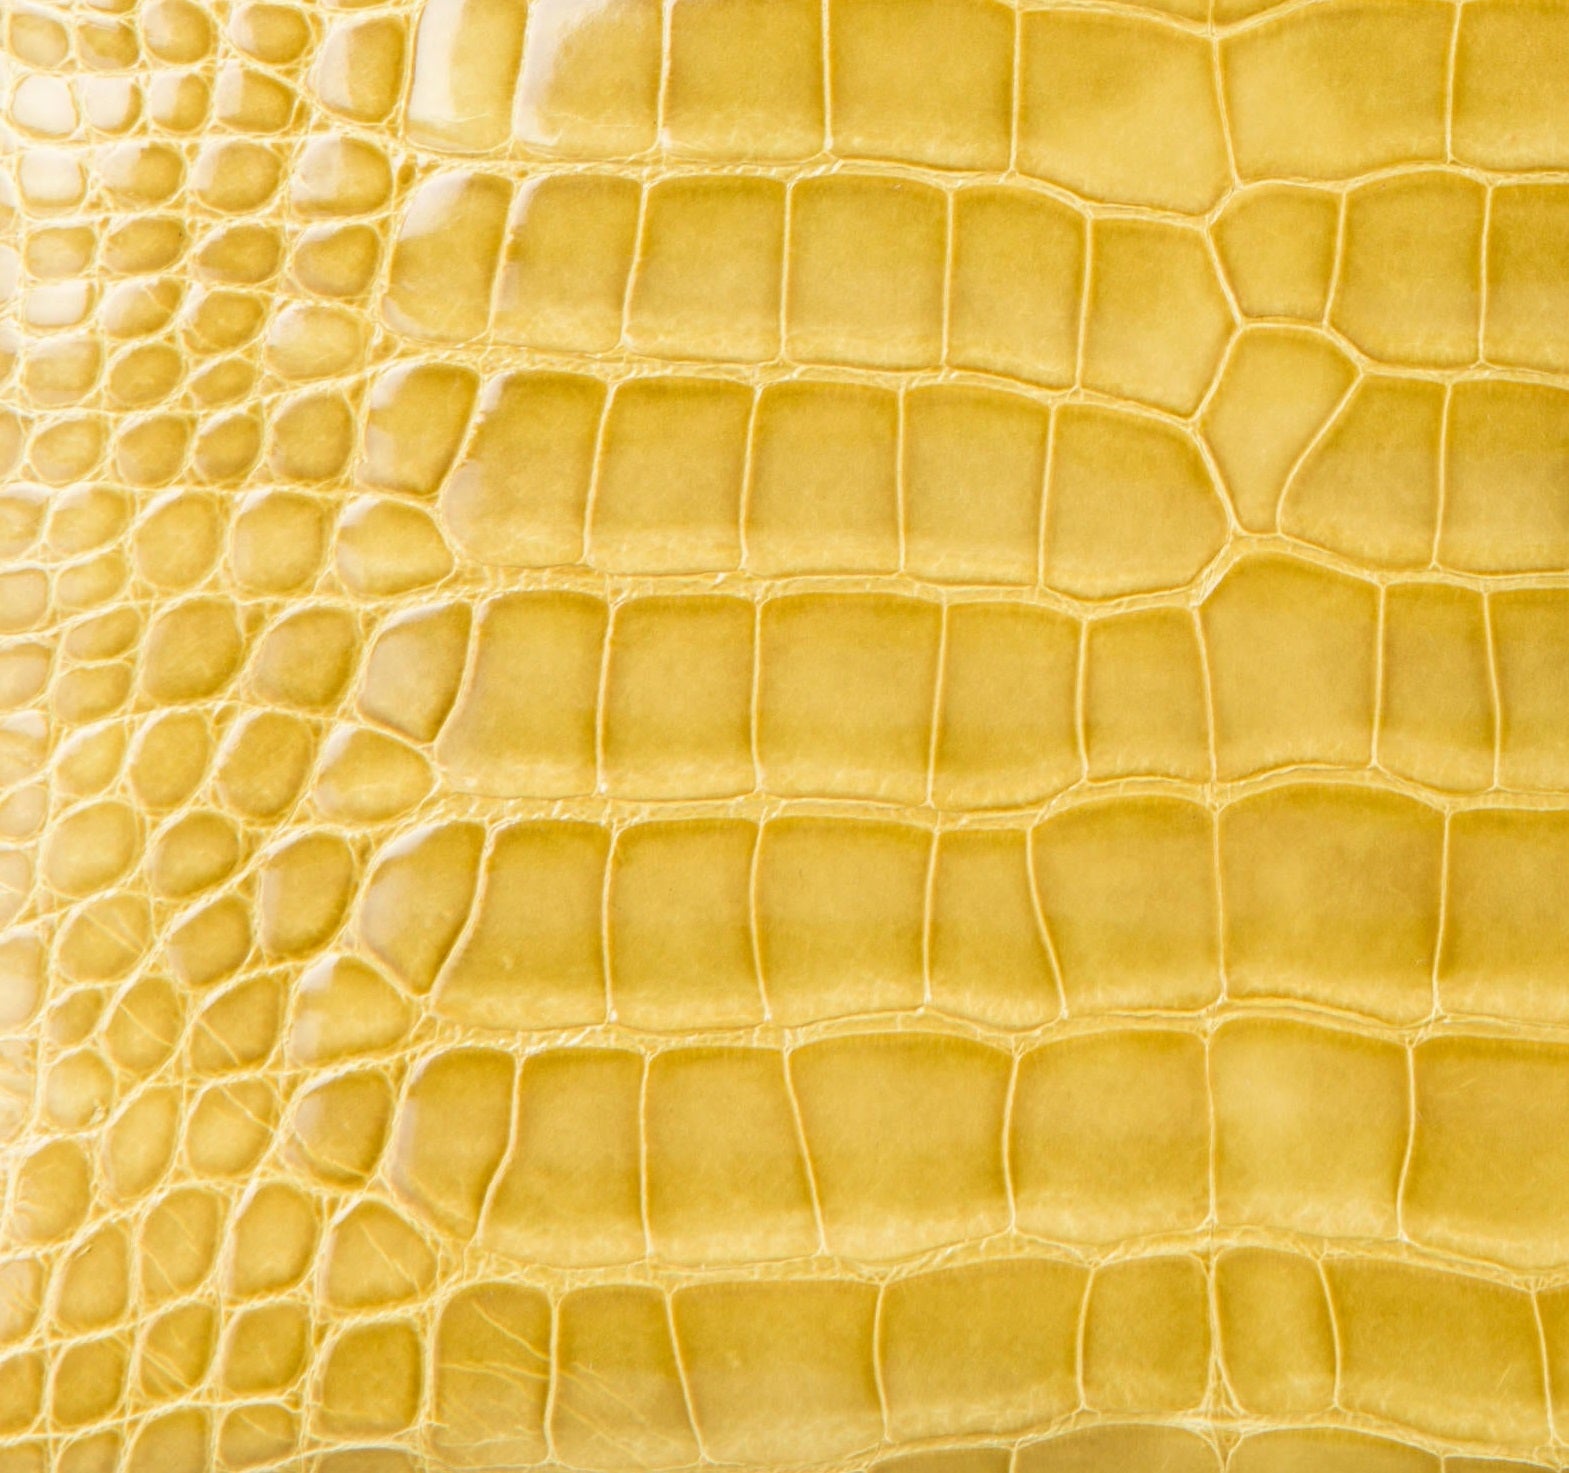 Ultimate Dior Leather Guide: What Are Dior Bags Made Of? dior crocodile leather